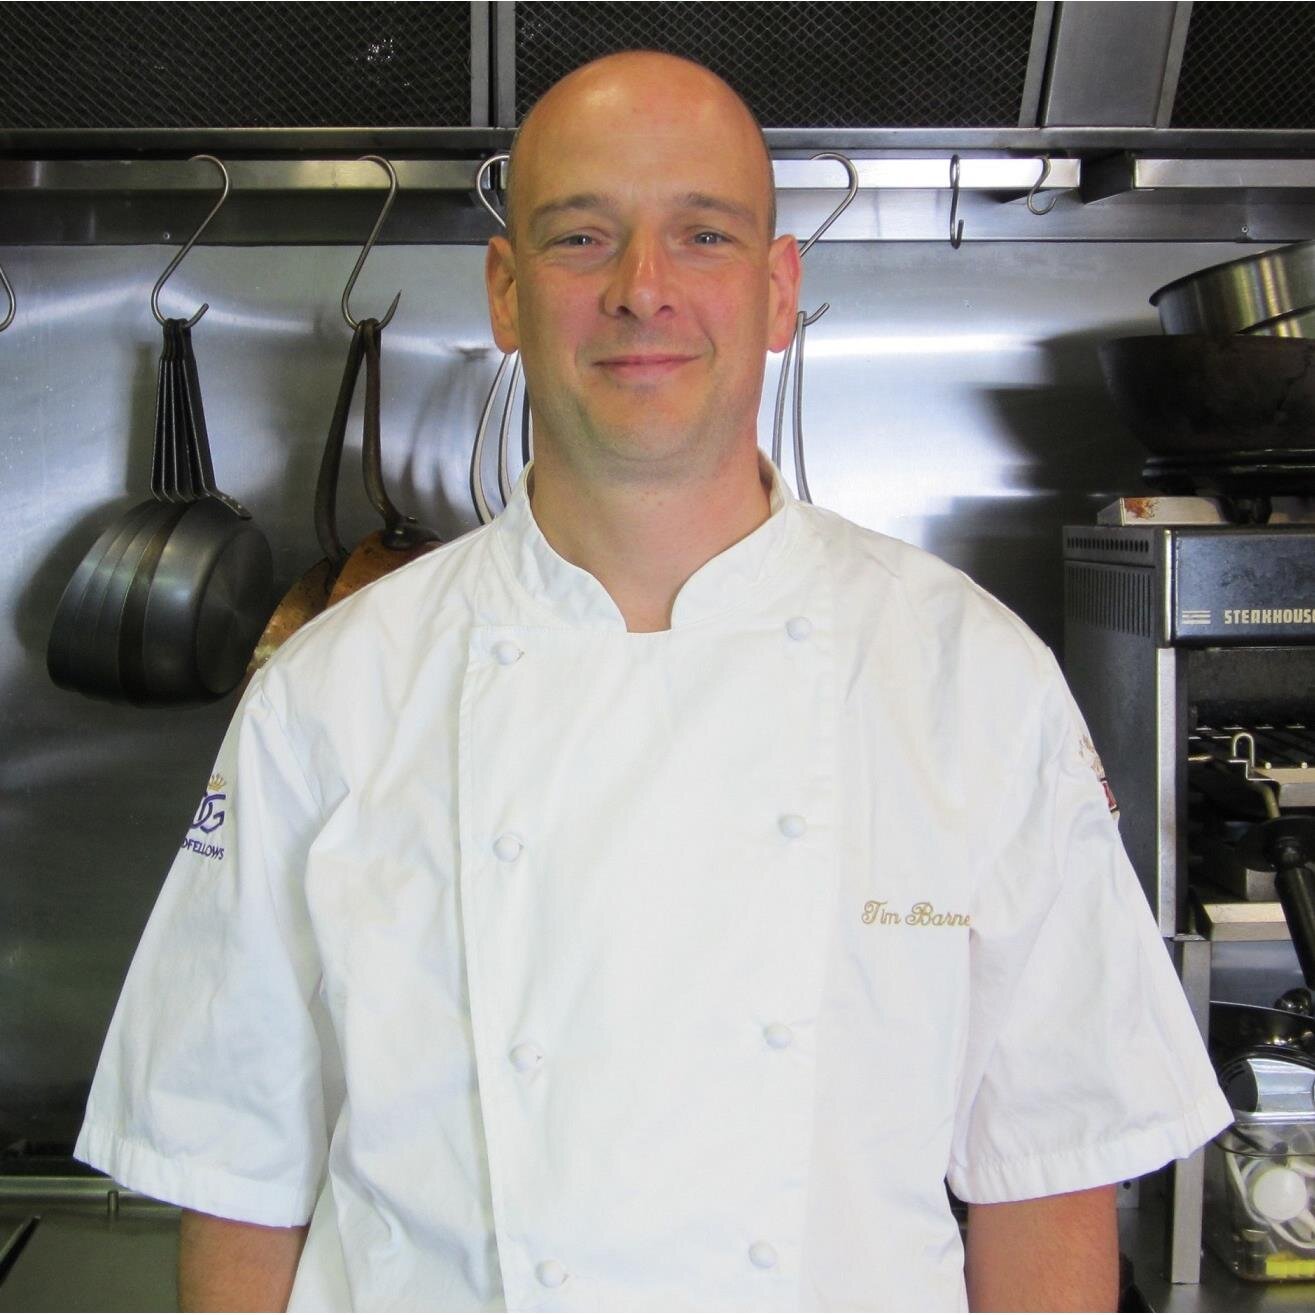 Passionate about cooking, fascinated about training & committed to personal development.